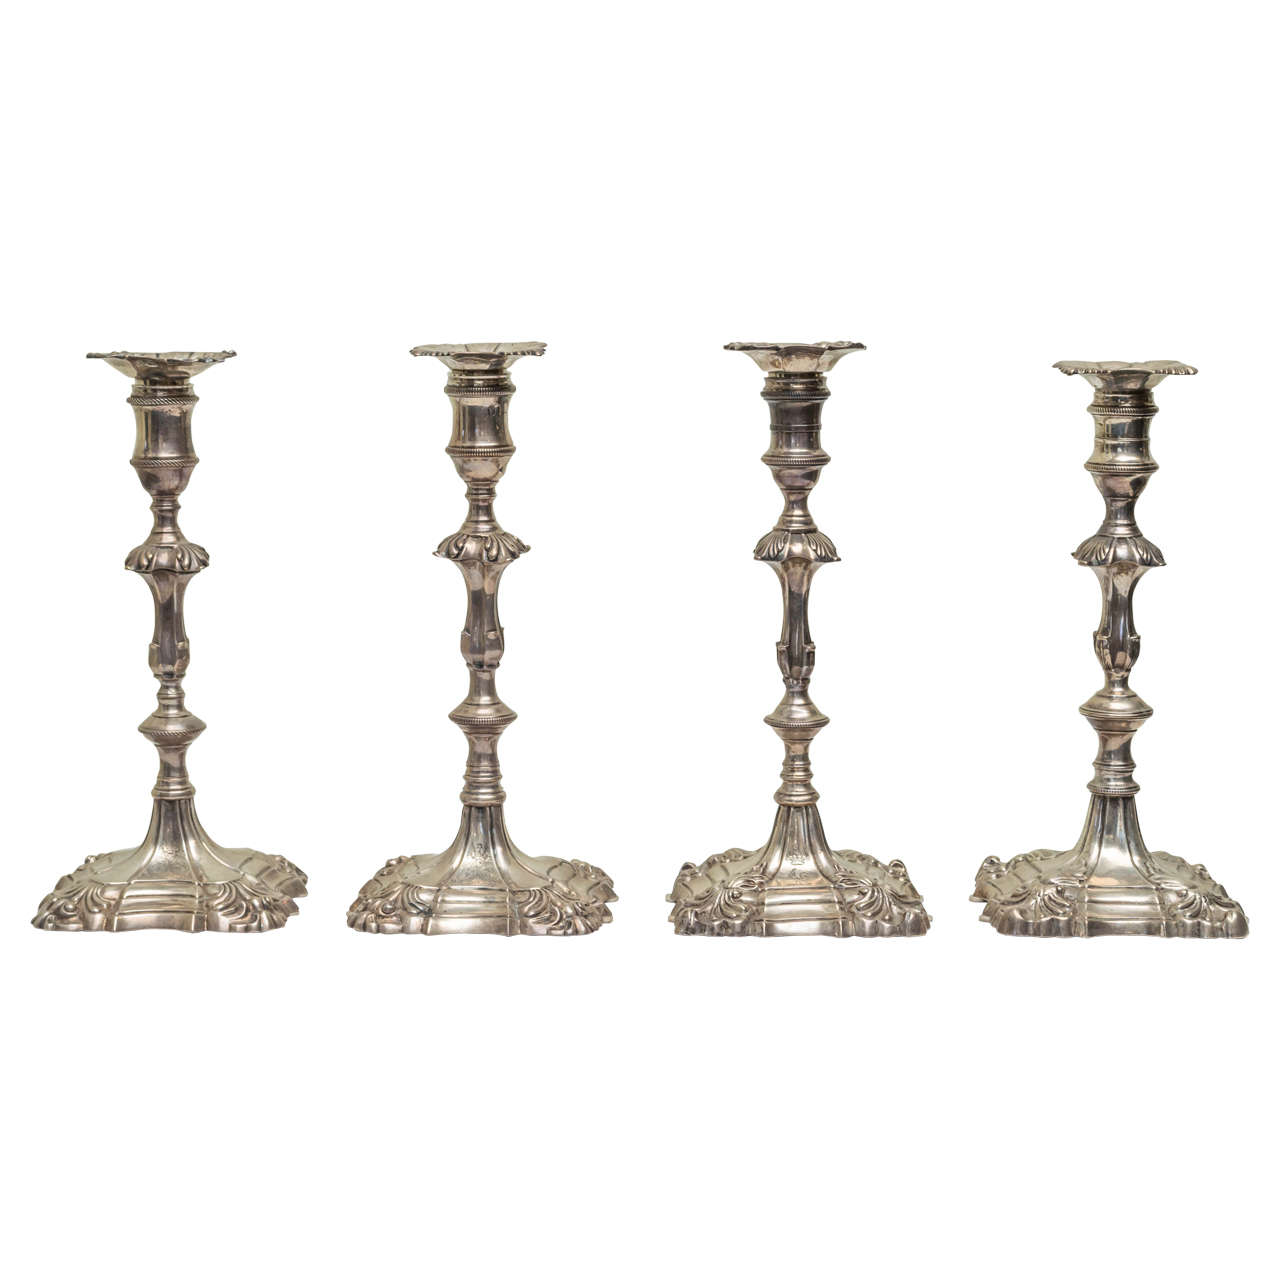 English Cast Sterling Silver Candlesticks in an Assembled Set of Four For Sale